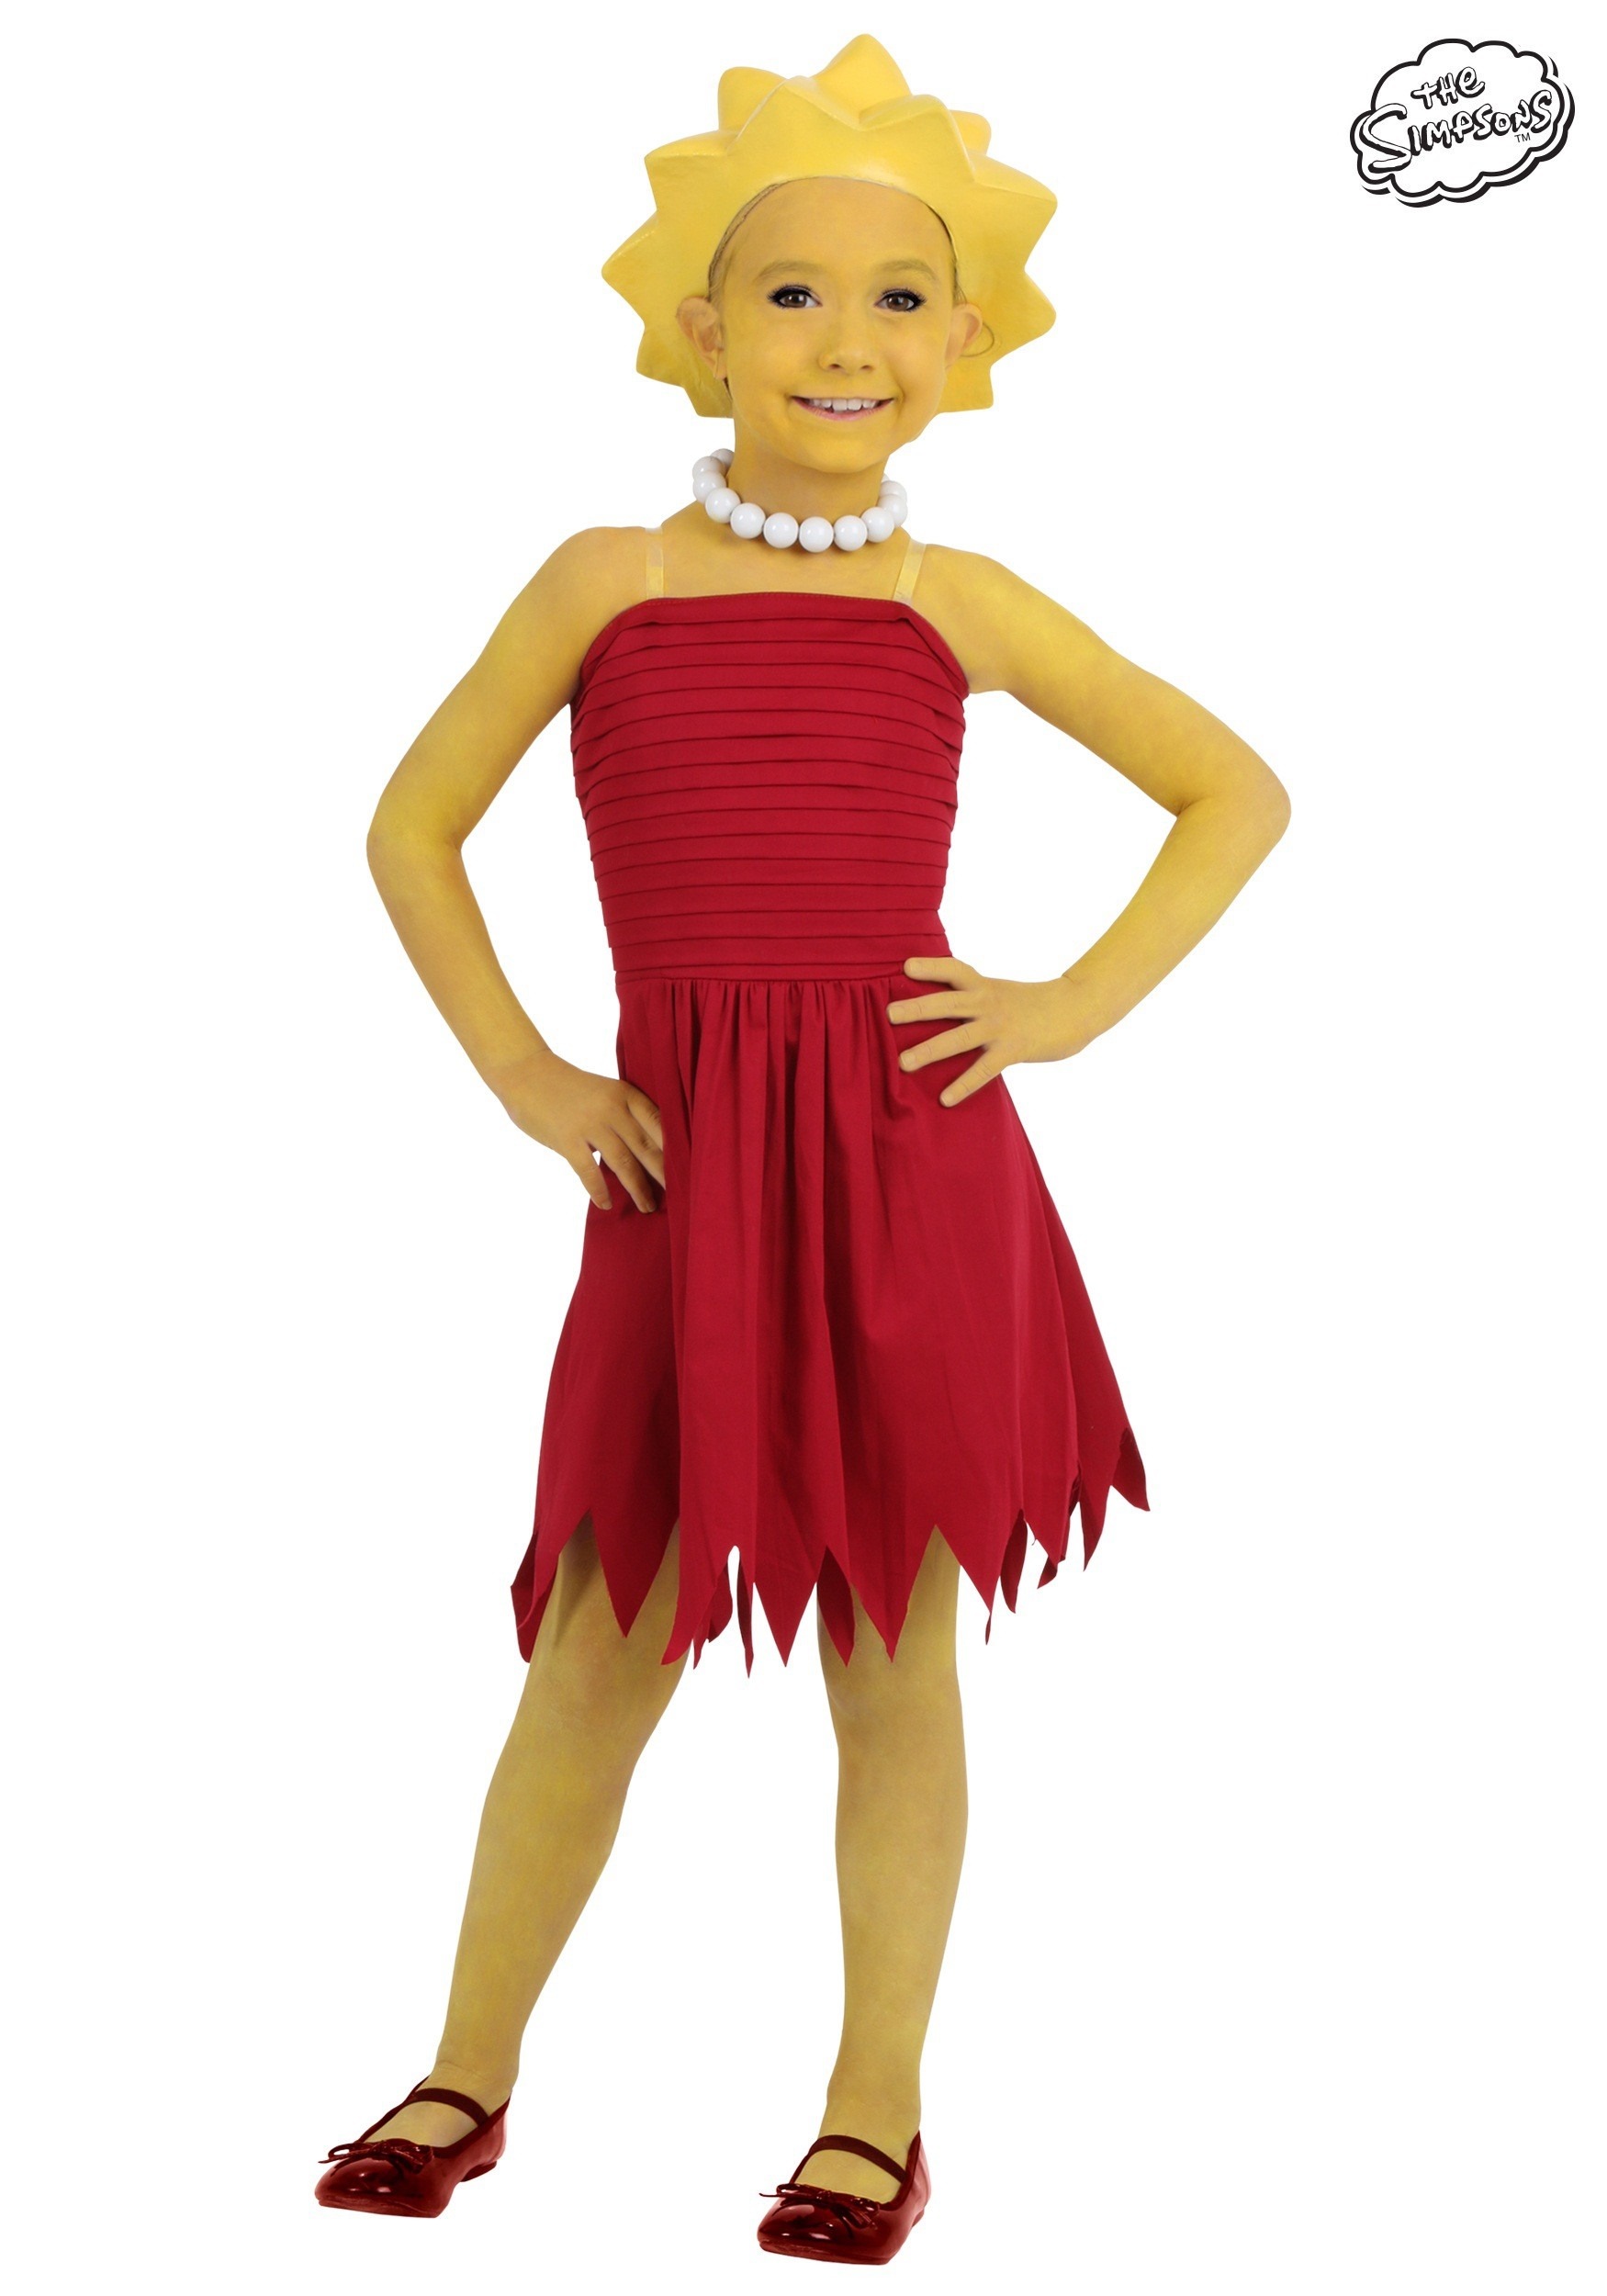 Simpsons Costumes - Simpsons Character Costumes and Masks